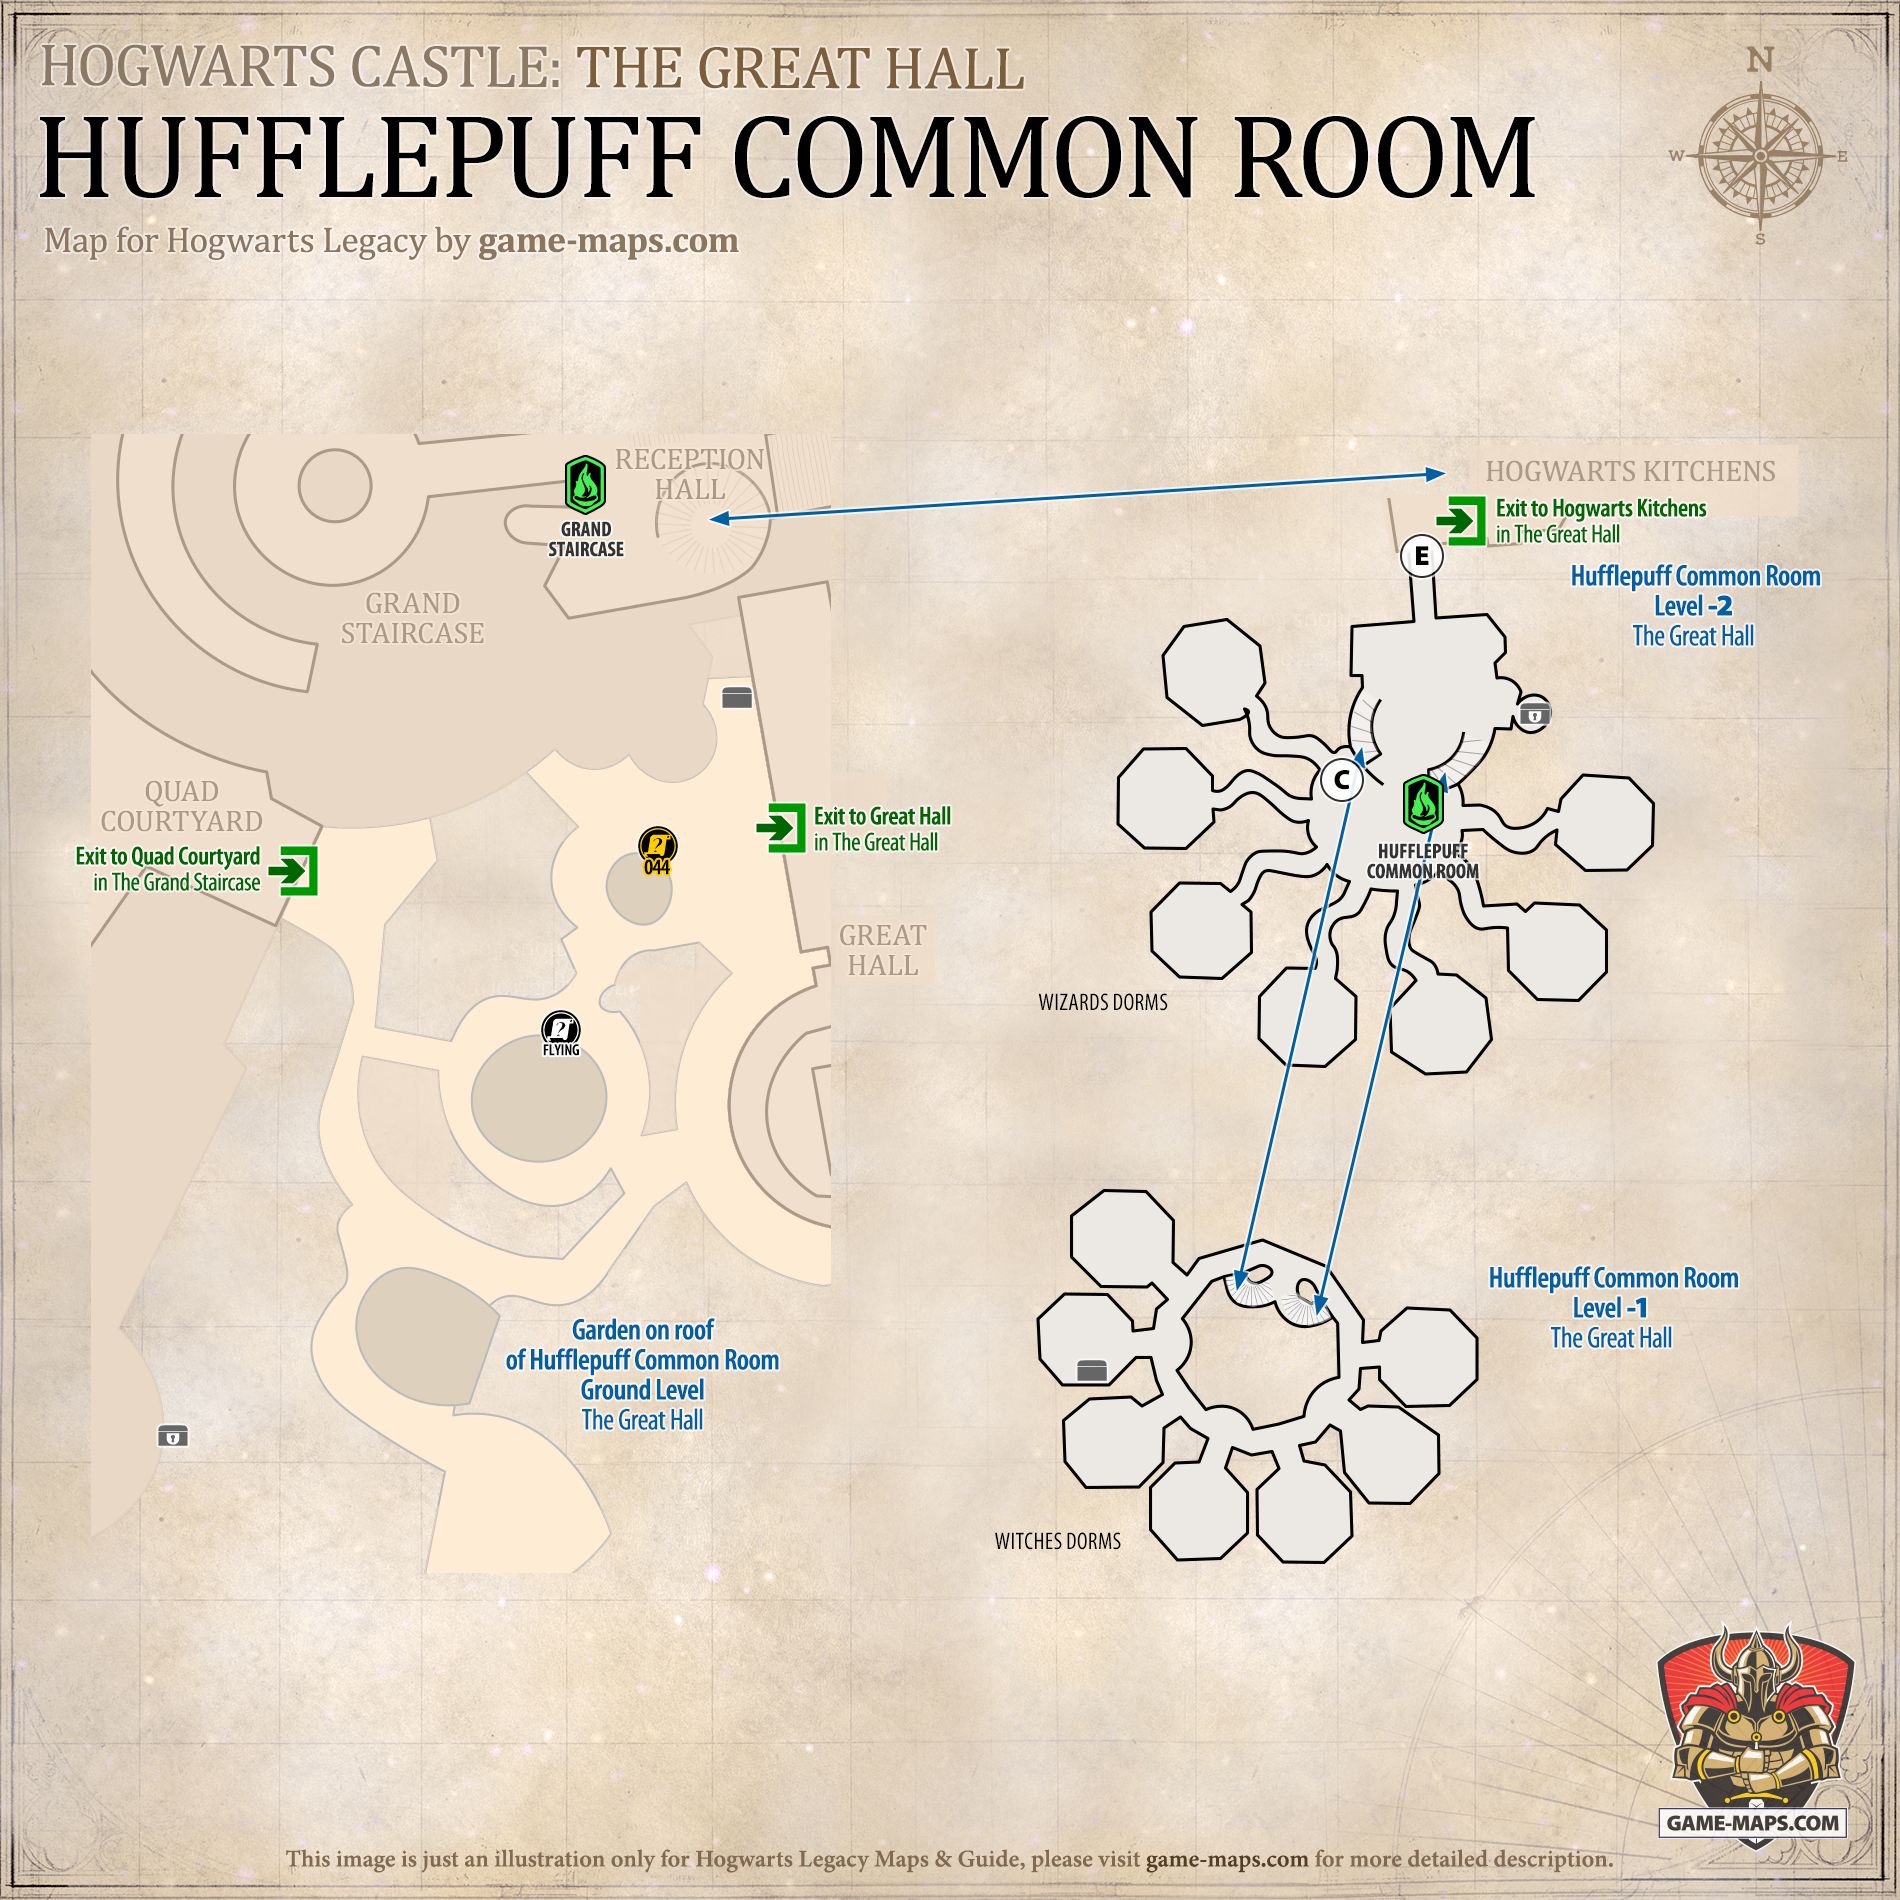 Hufflepuff Common Room Map for Hogwarts Legacy